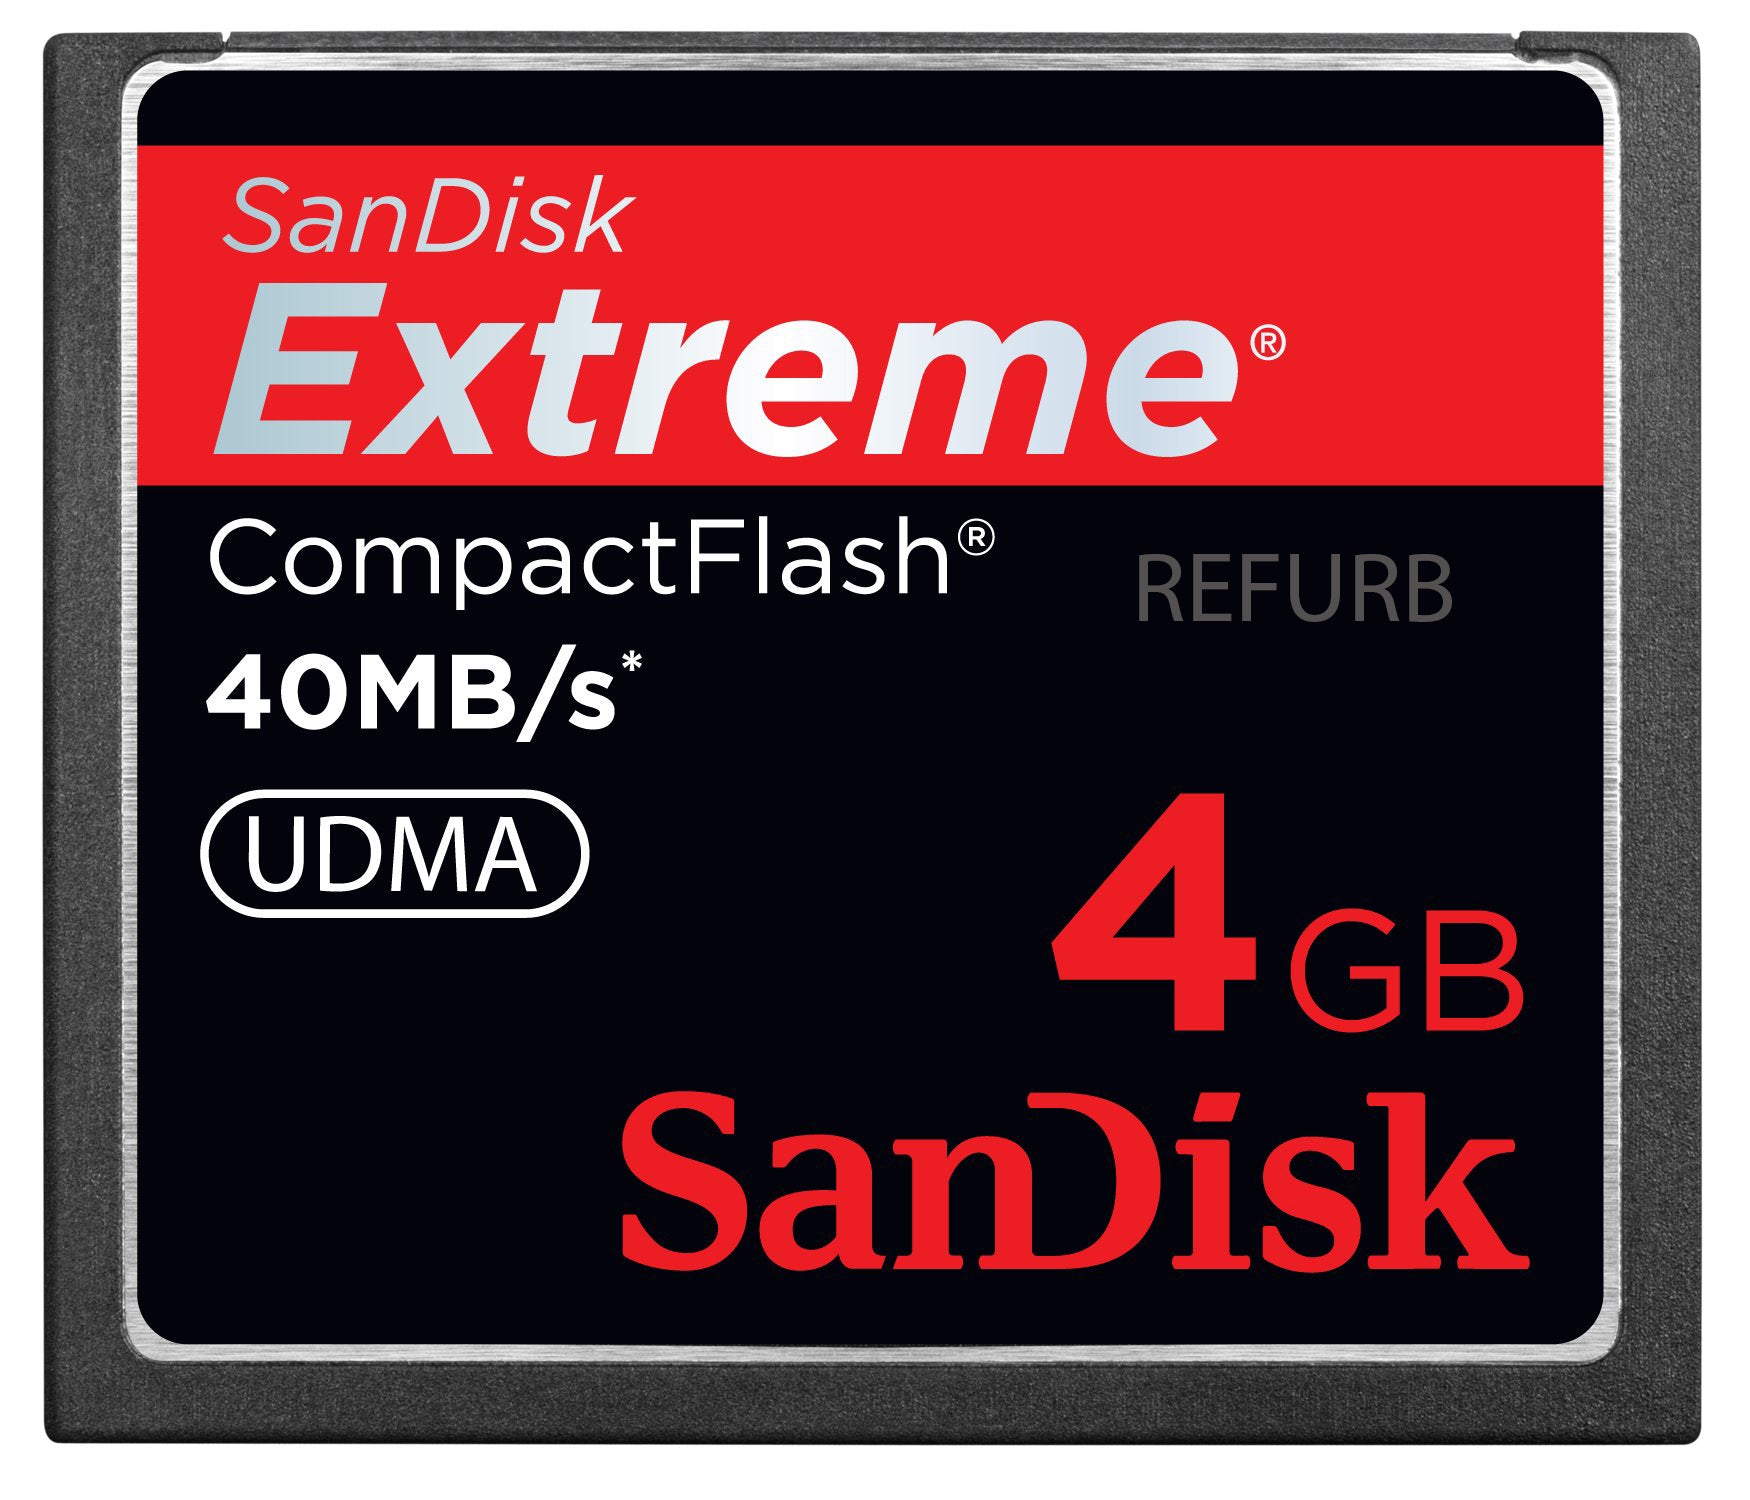 SanDisk Extreme 4GB CompactFlash Memory Card SDCFX-004G-X46-CR (Certified Refurbished)